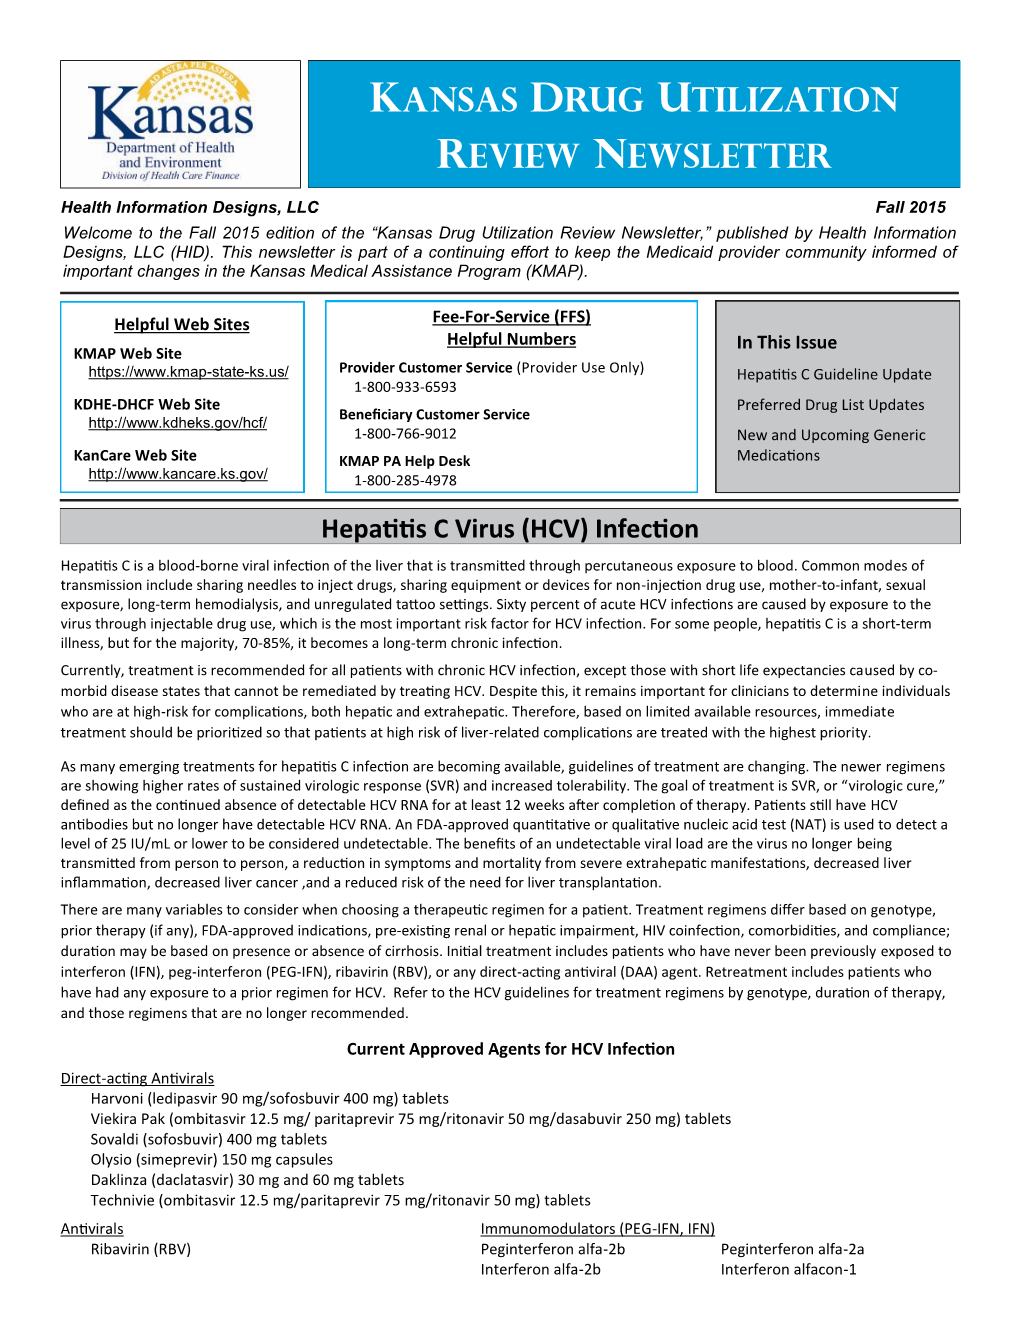 Fall 2015 Welcome to the Fall 2015 Edition of the “Kansas Drug Utilization Review Newsletter,” Published by Health Information Designs, LLC (HID)